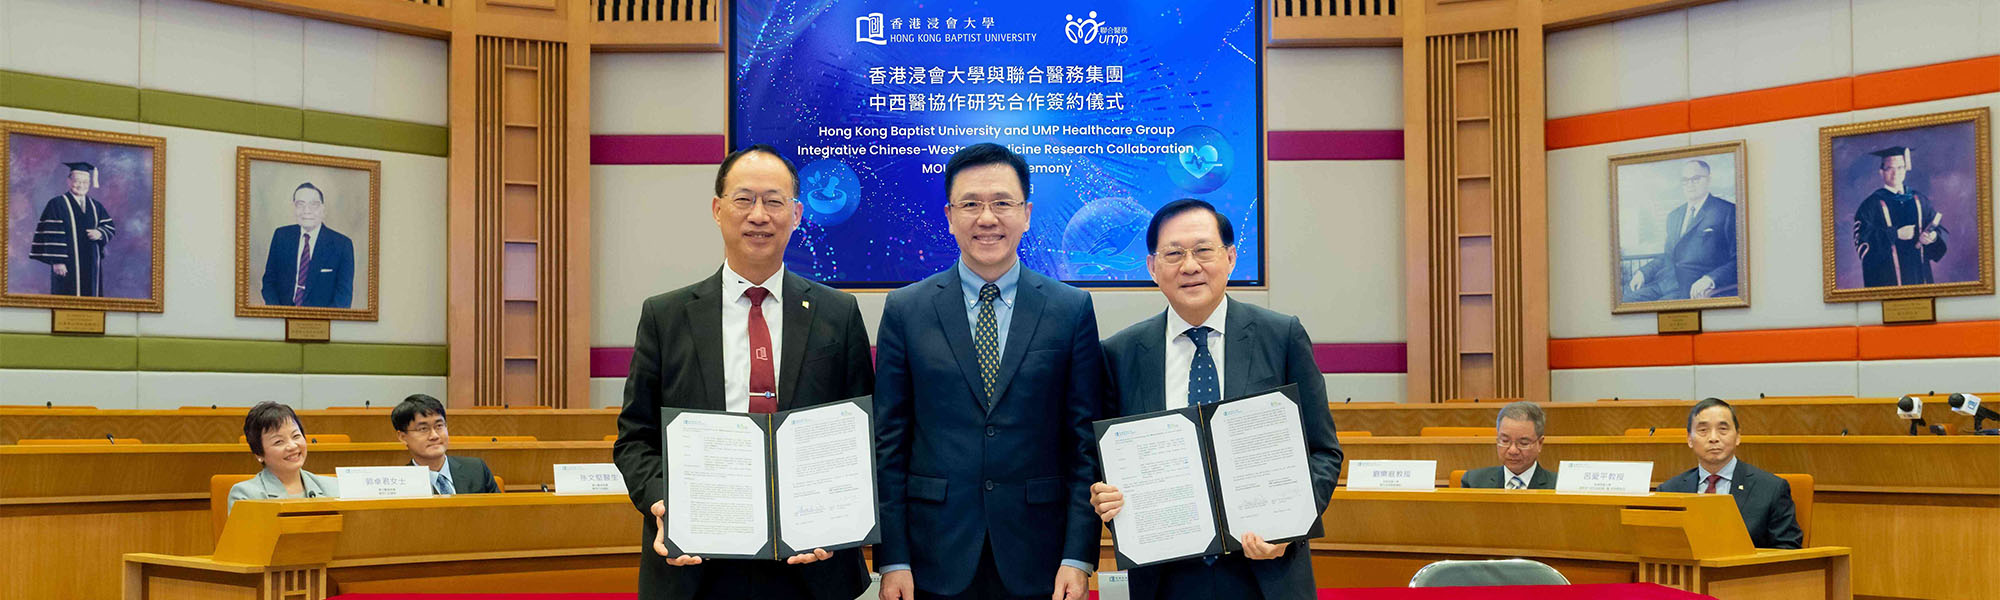 HKBU and UMP Healthcare sign MOU on integrative Chinese-Western medicine research collaboration